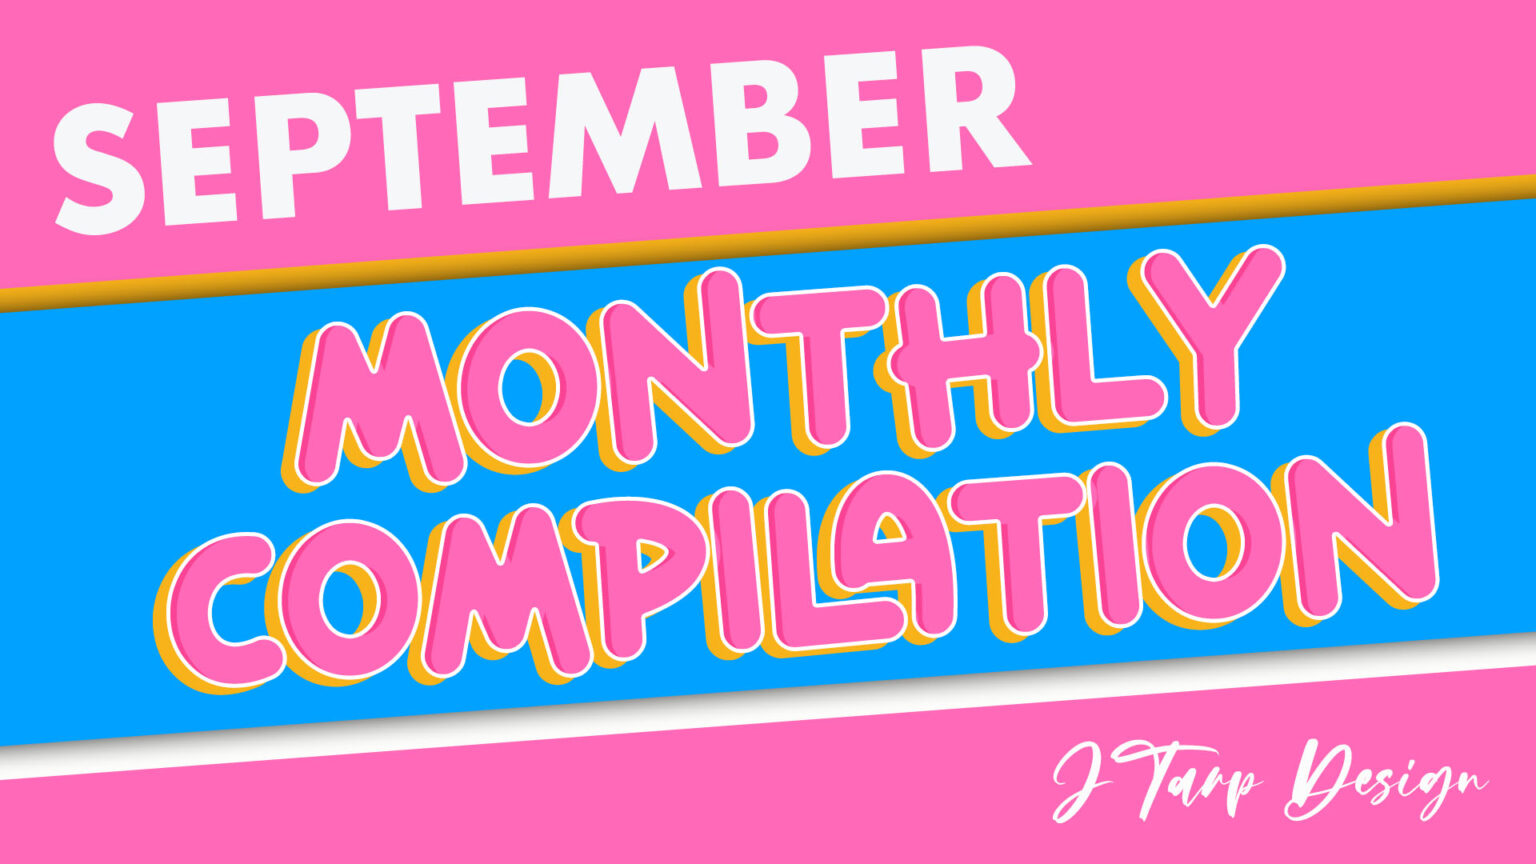 September Monthly Compilation